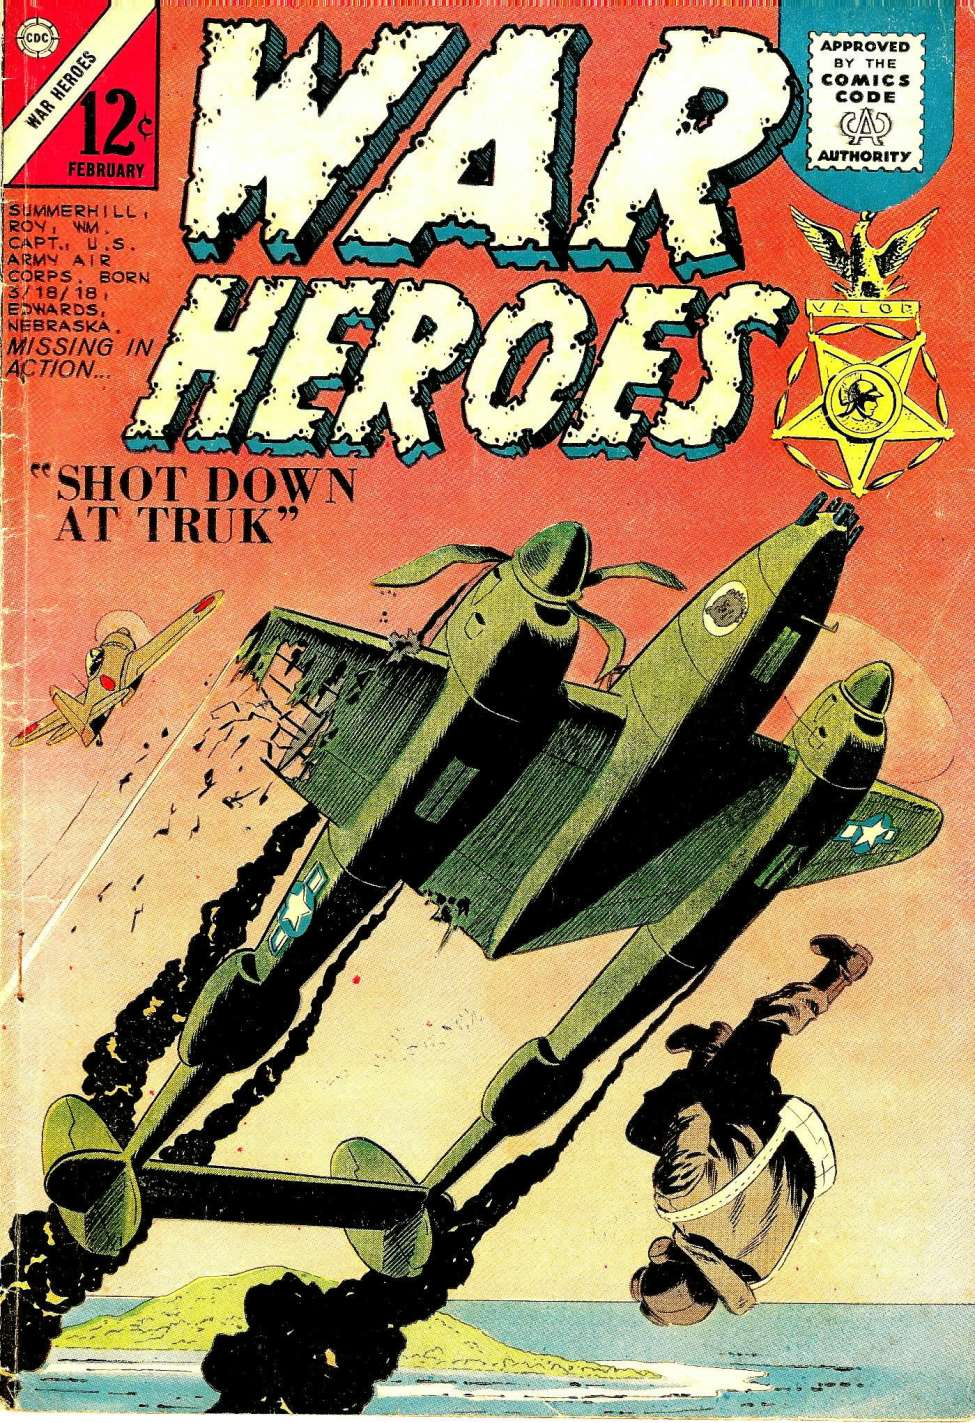 Book Cover For War Heroes 7 (alt) - Version 2